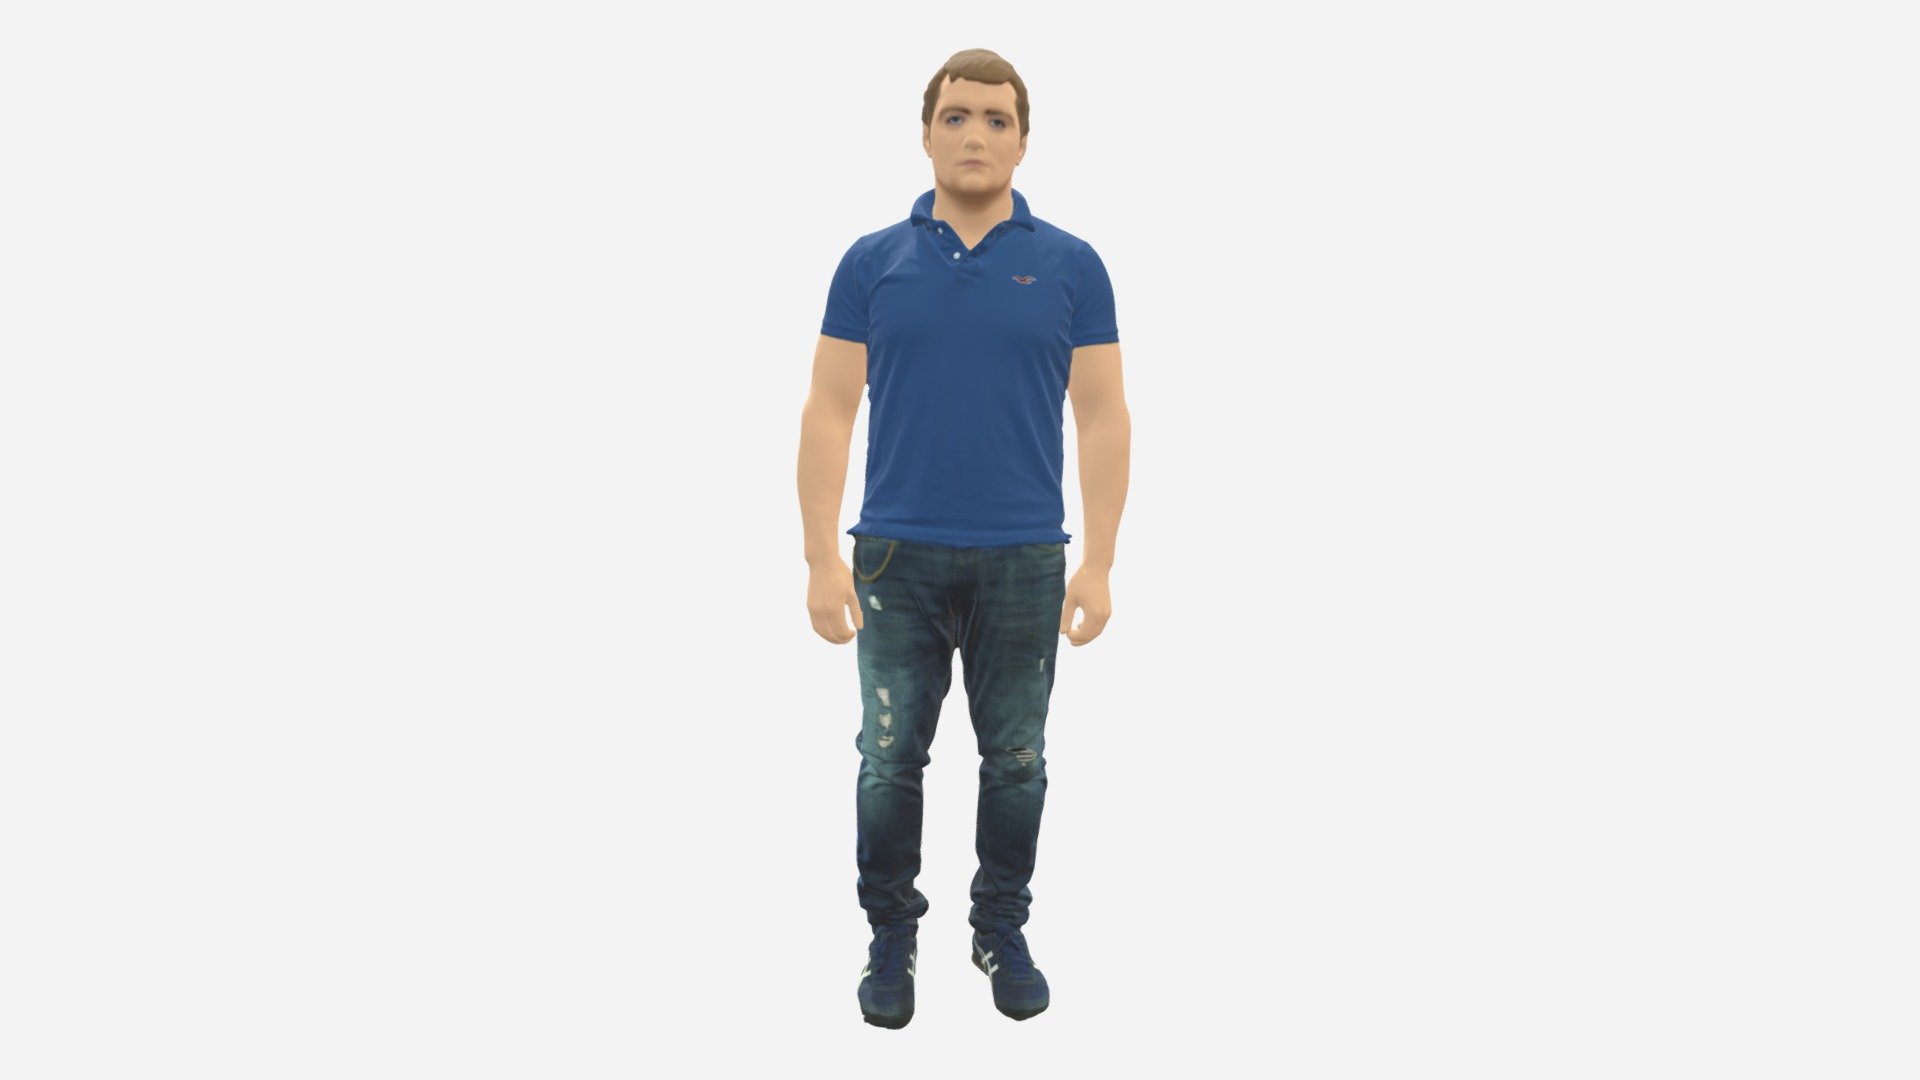 We provide unique 3d scanned models with realistic proportions for closeup and medium-distance views in artworks, paintings and classes. As well as architectural visualization projects.

Main features:




high-end realistic 3d scanned model;

realistic proportions;

highest quality;

low price;

saves you time for more time in landscaping and interiors visualization.

FEATURES 




3d scanned model 

Extremely clean

Edge Loops based

smoothable

symmetrical

professional quality UV map

high level of detail

high resolution textures

real-world scale

system unit: cm

TEXTURES 




Textural Resolution: 4096 x 4096

Color Map

The model is suitable for stereolithography 3d printing 

The model is also ready for fullcolour 3d printing - Man In Blue Polo Jeans 0599 - Buy Royalty Free 3D model by 3DFarm 3d model